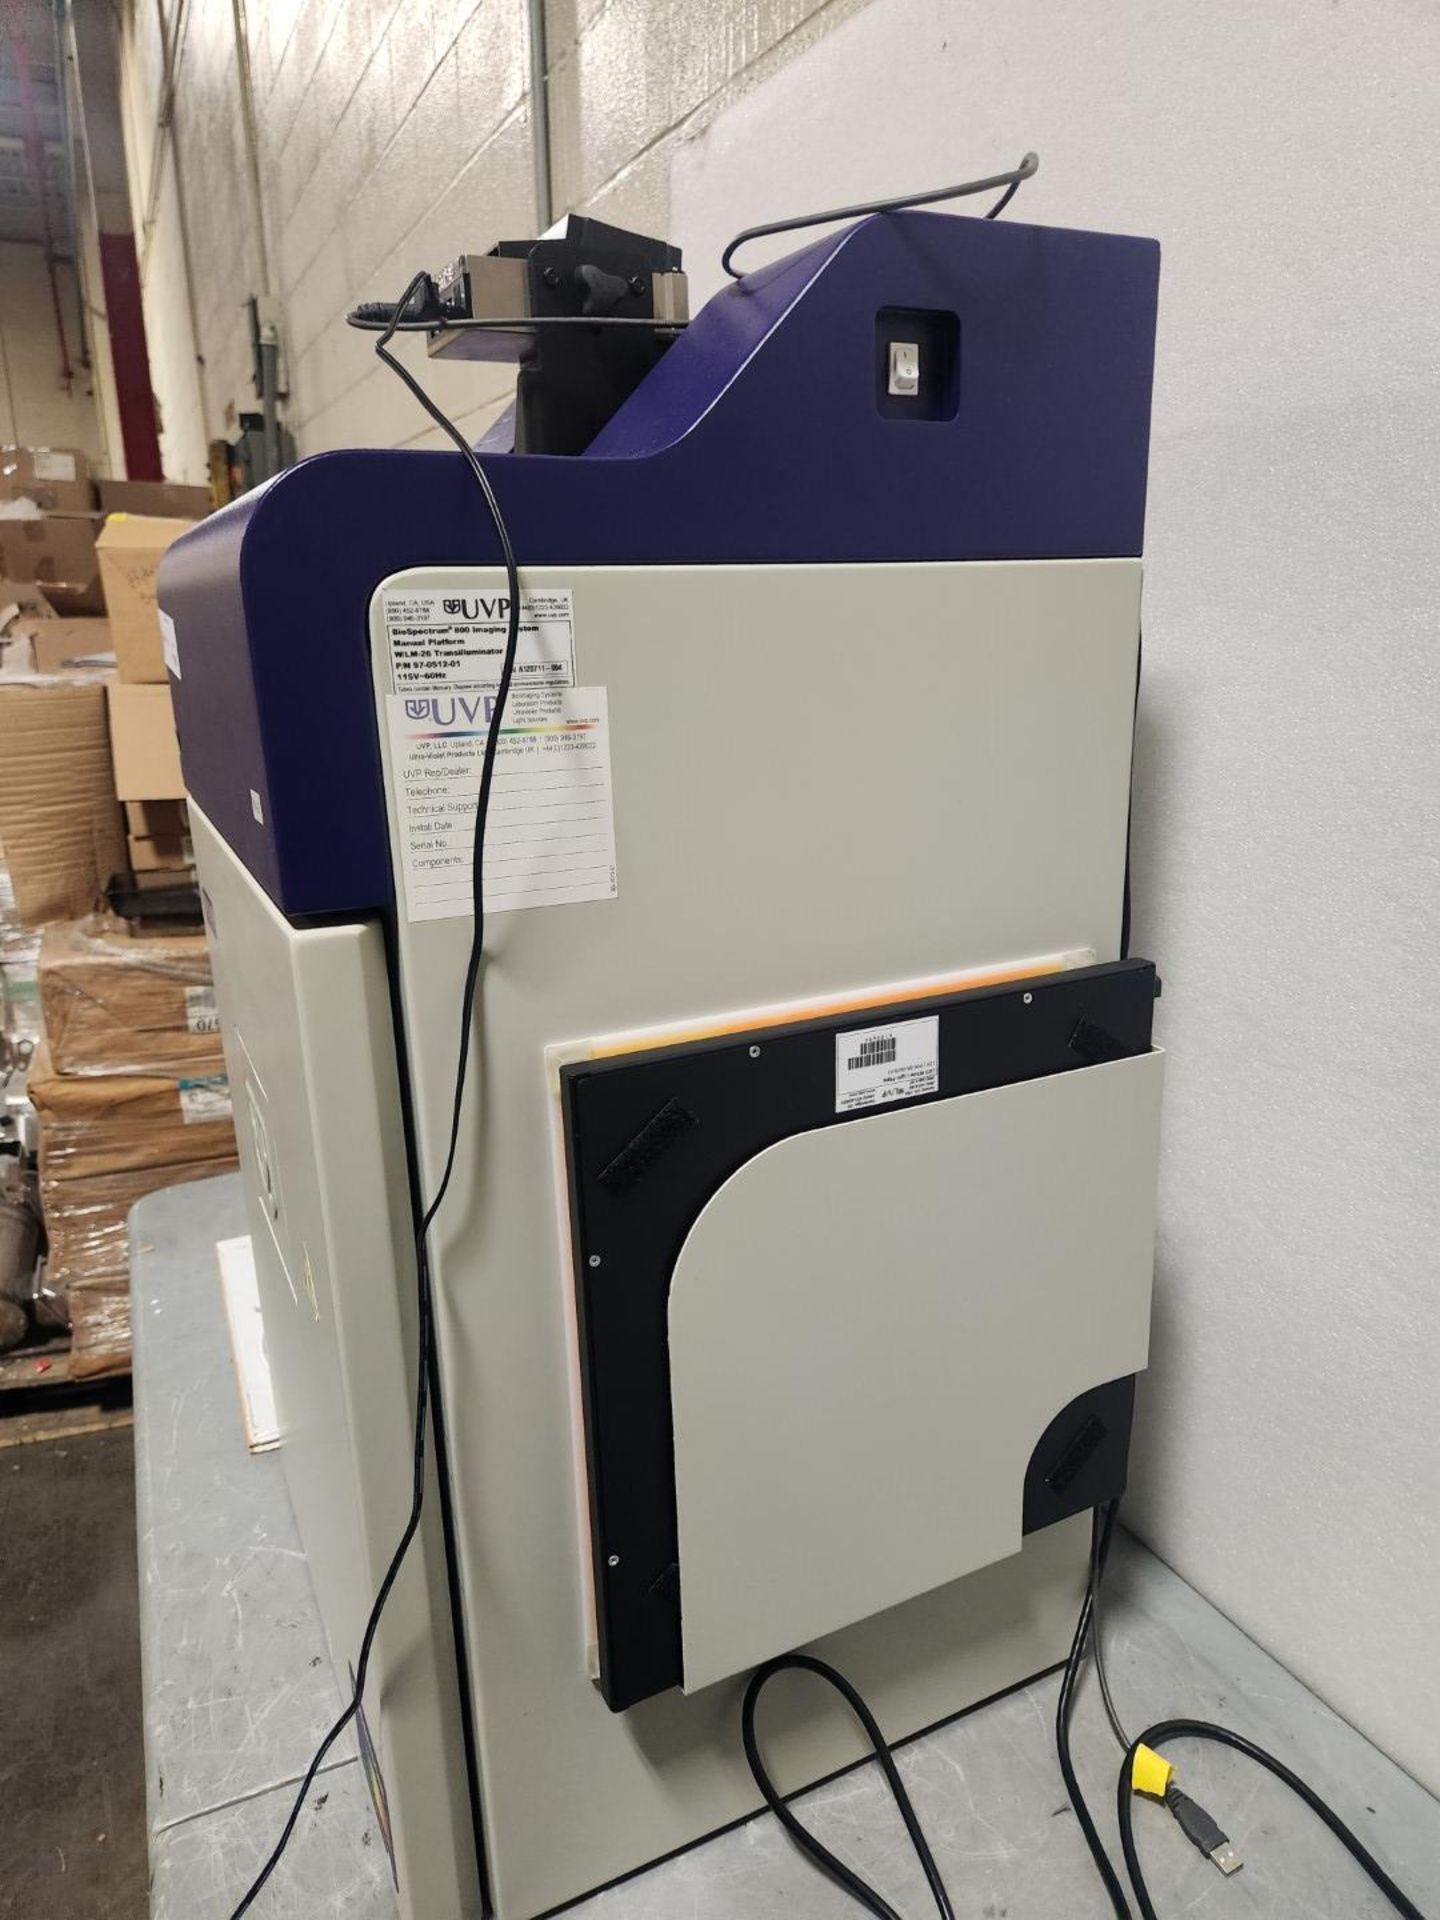 UVP Biospectrum Multispectral imaging system, model 800, with camera and transilluminator, with - Image 6 of 8